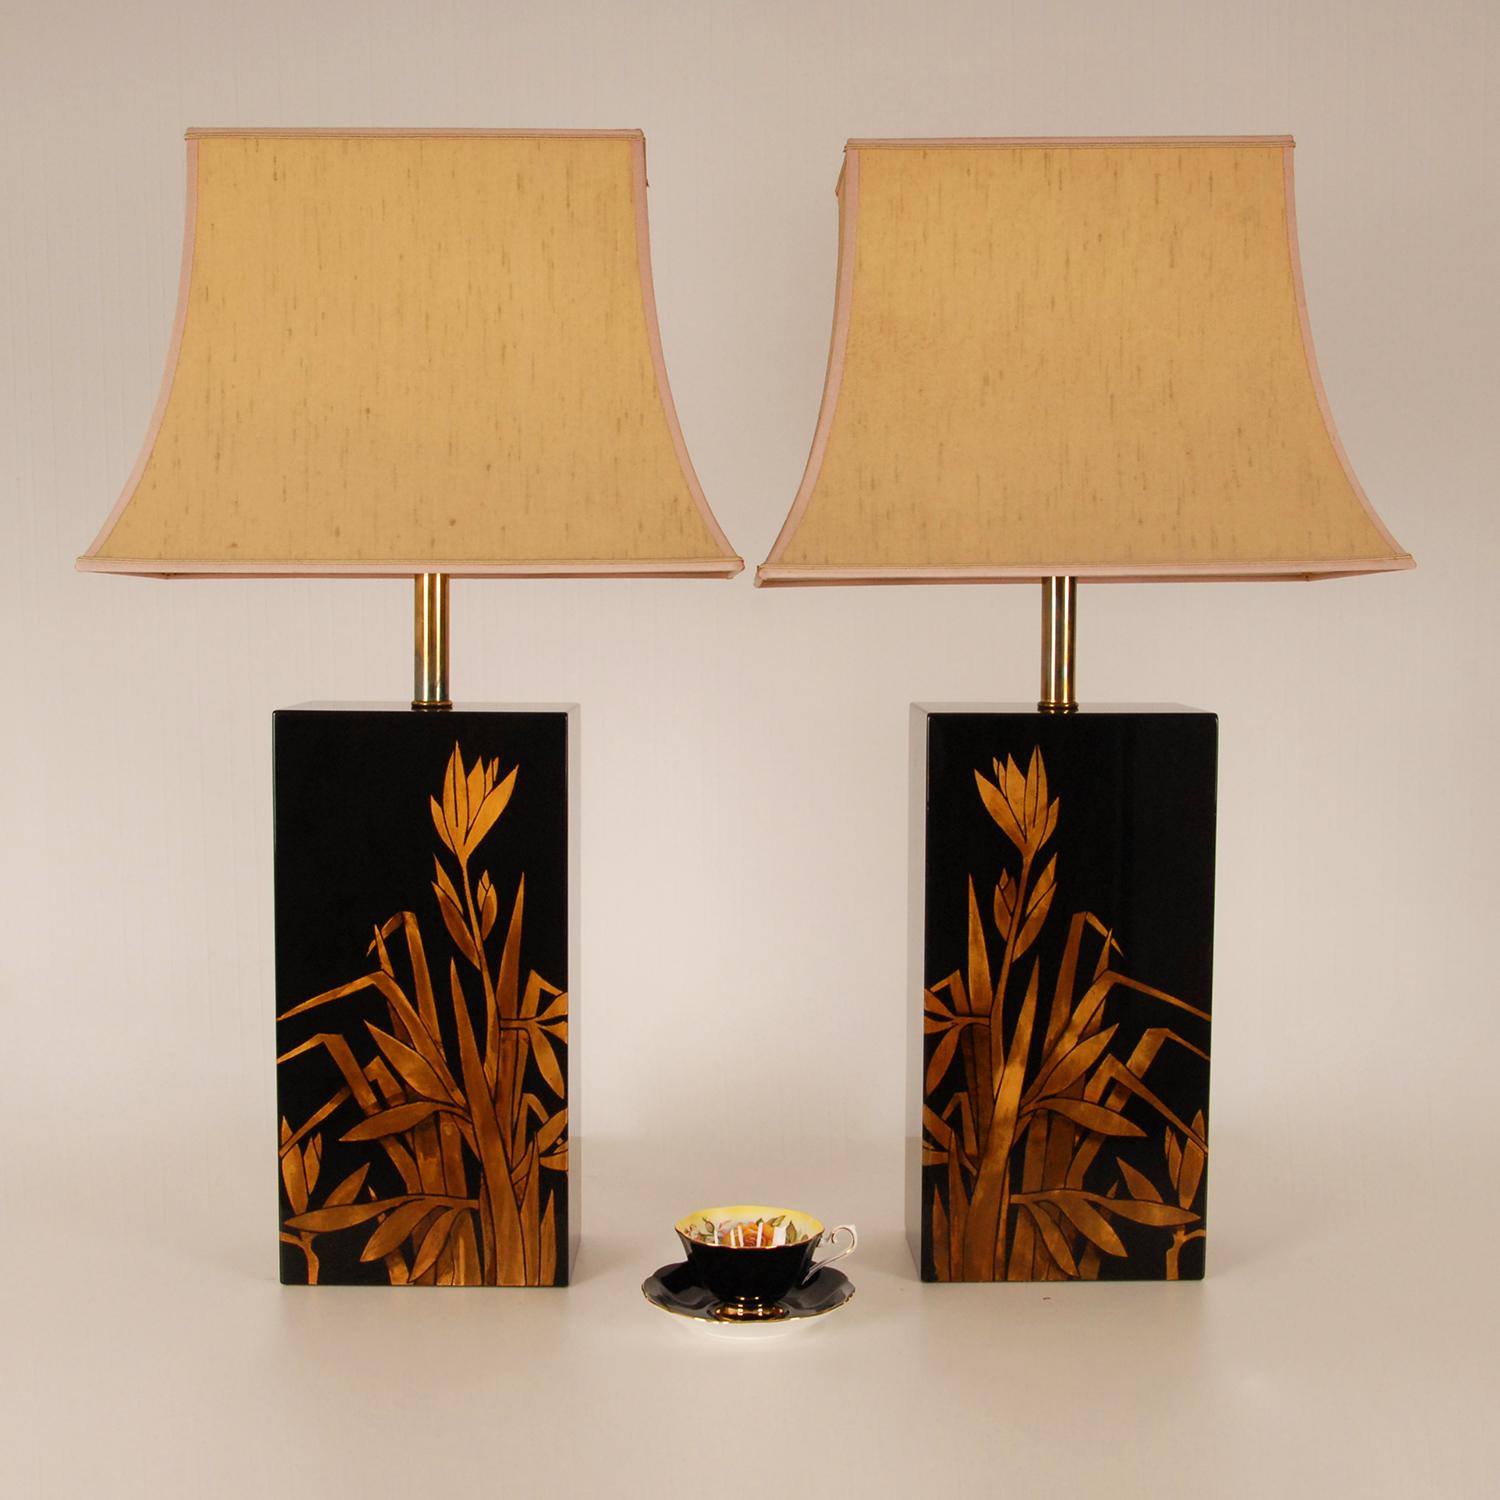 Acrylic Vintage Chinoiserie Gold and Black lacquer Pagoda Table Lamps Retro 1970s a Pair For Sale